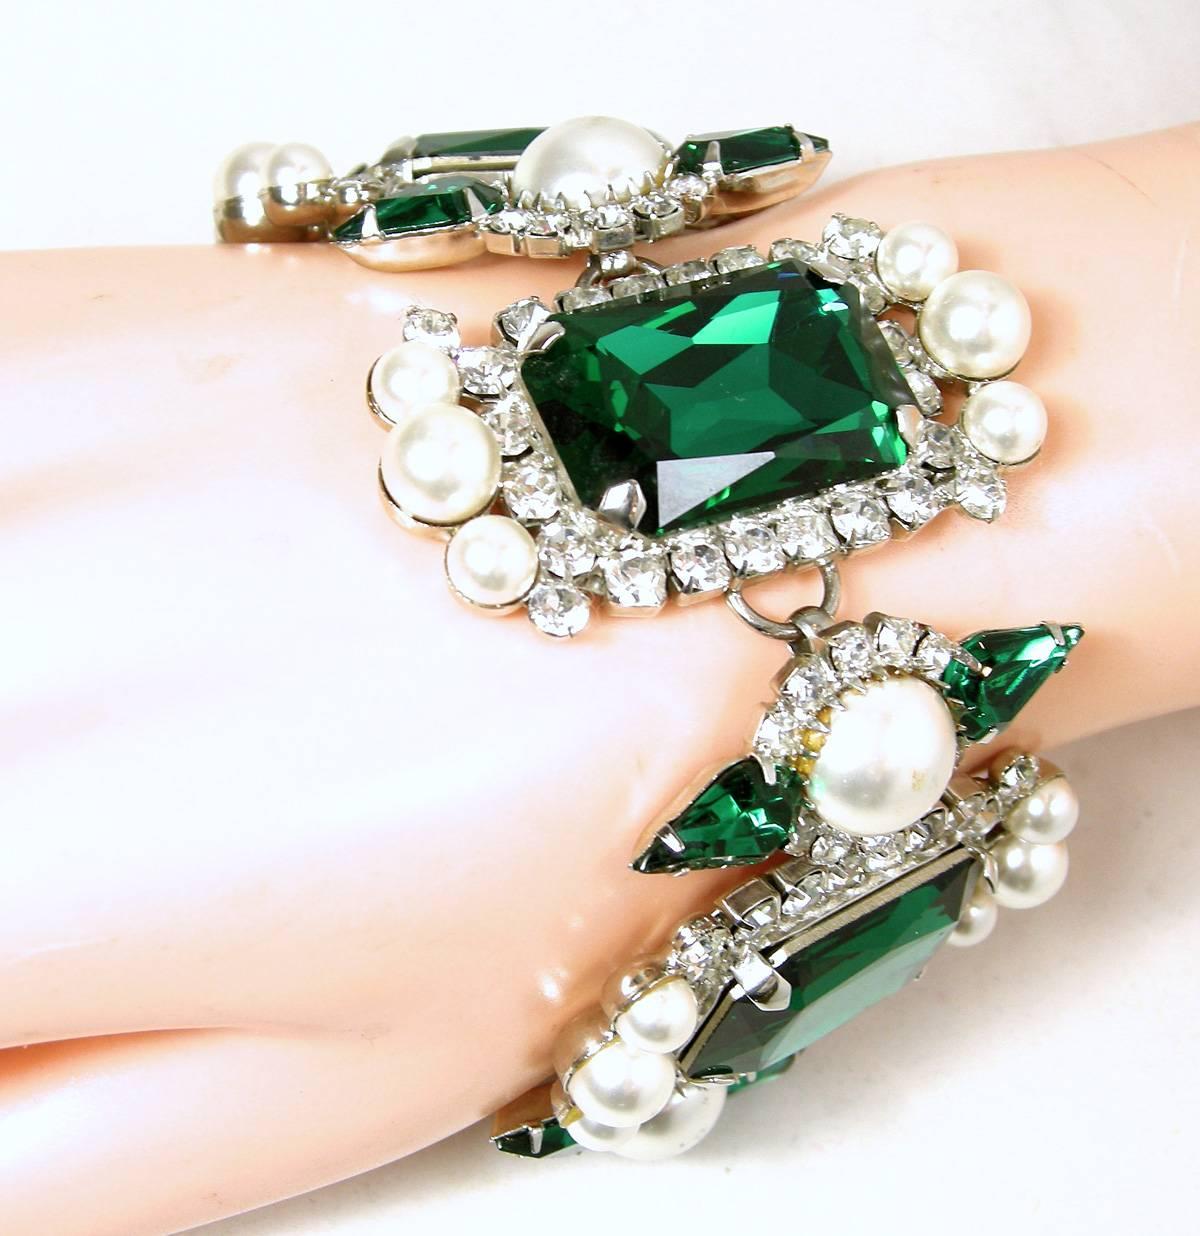 This vintage bracelet is magnificent and looks like it came out of the Queen’s Tower of London.   There are five links with large emerald green crystals in the center and bordered with beautiful faux pearls on the cop and bottom and clear crystal on